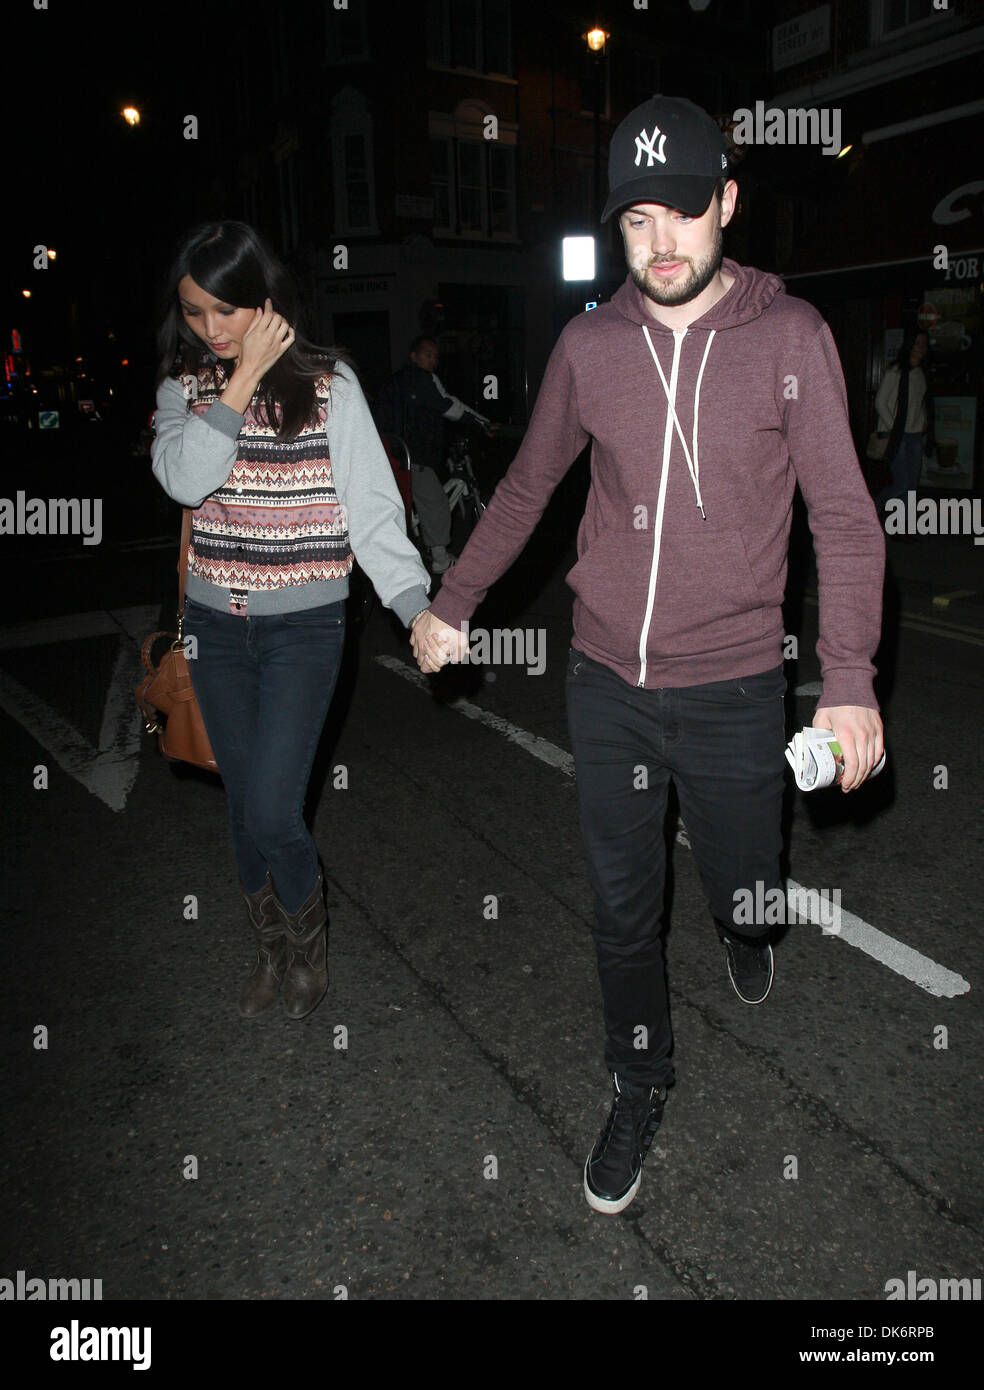 Jack Whitehall and Gemma Chan outside the Groucho club in Soho London, England - 27.09.12 Stock Photo